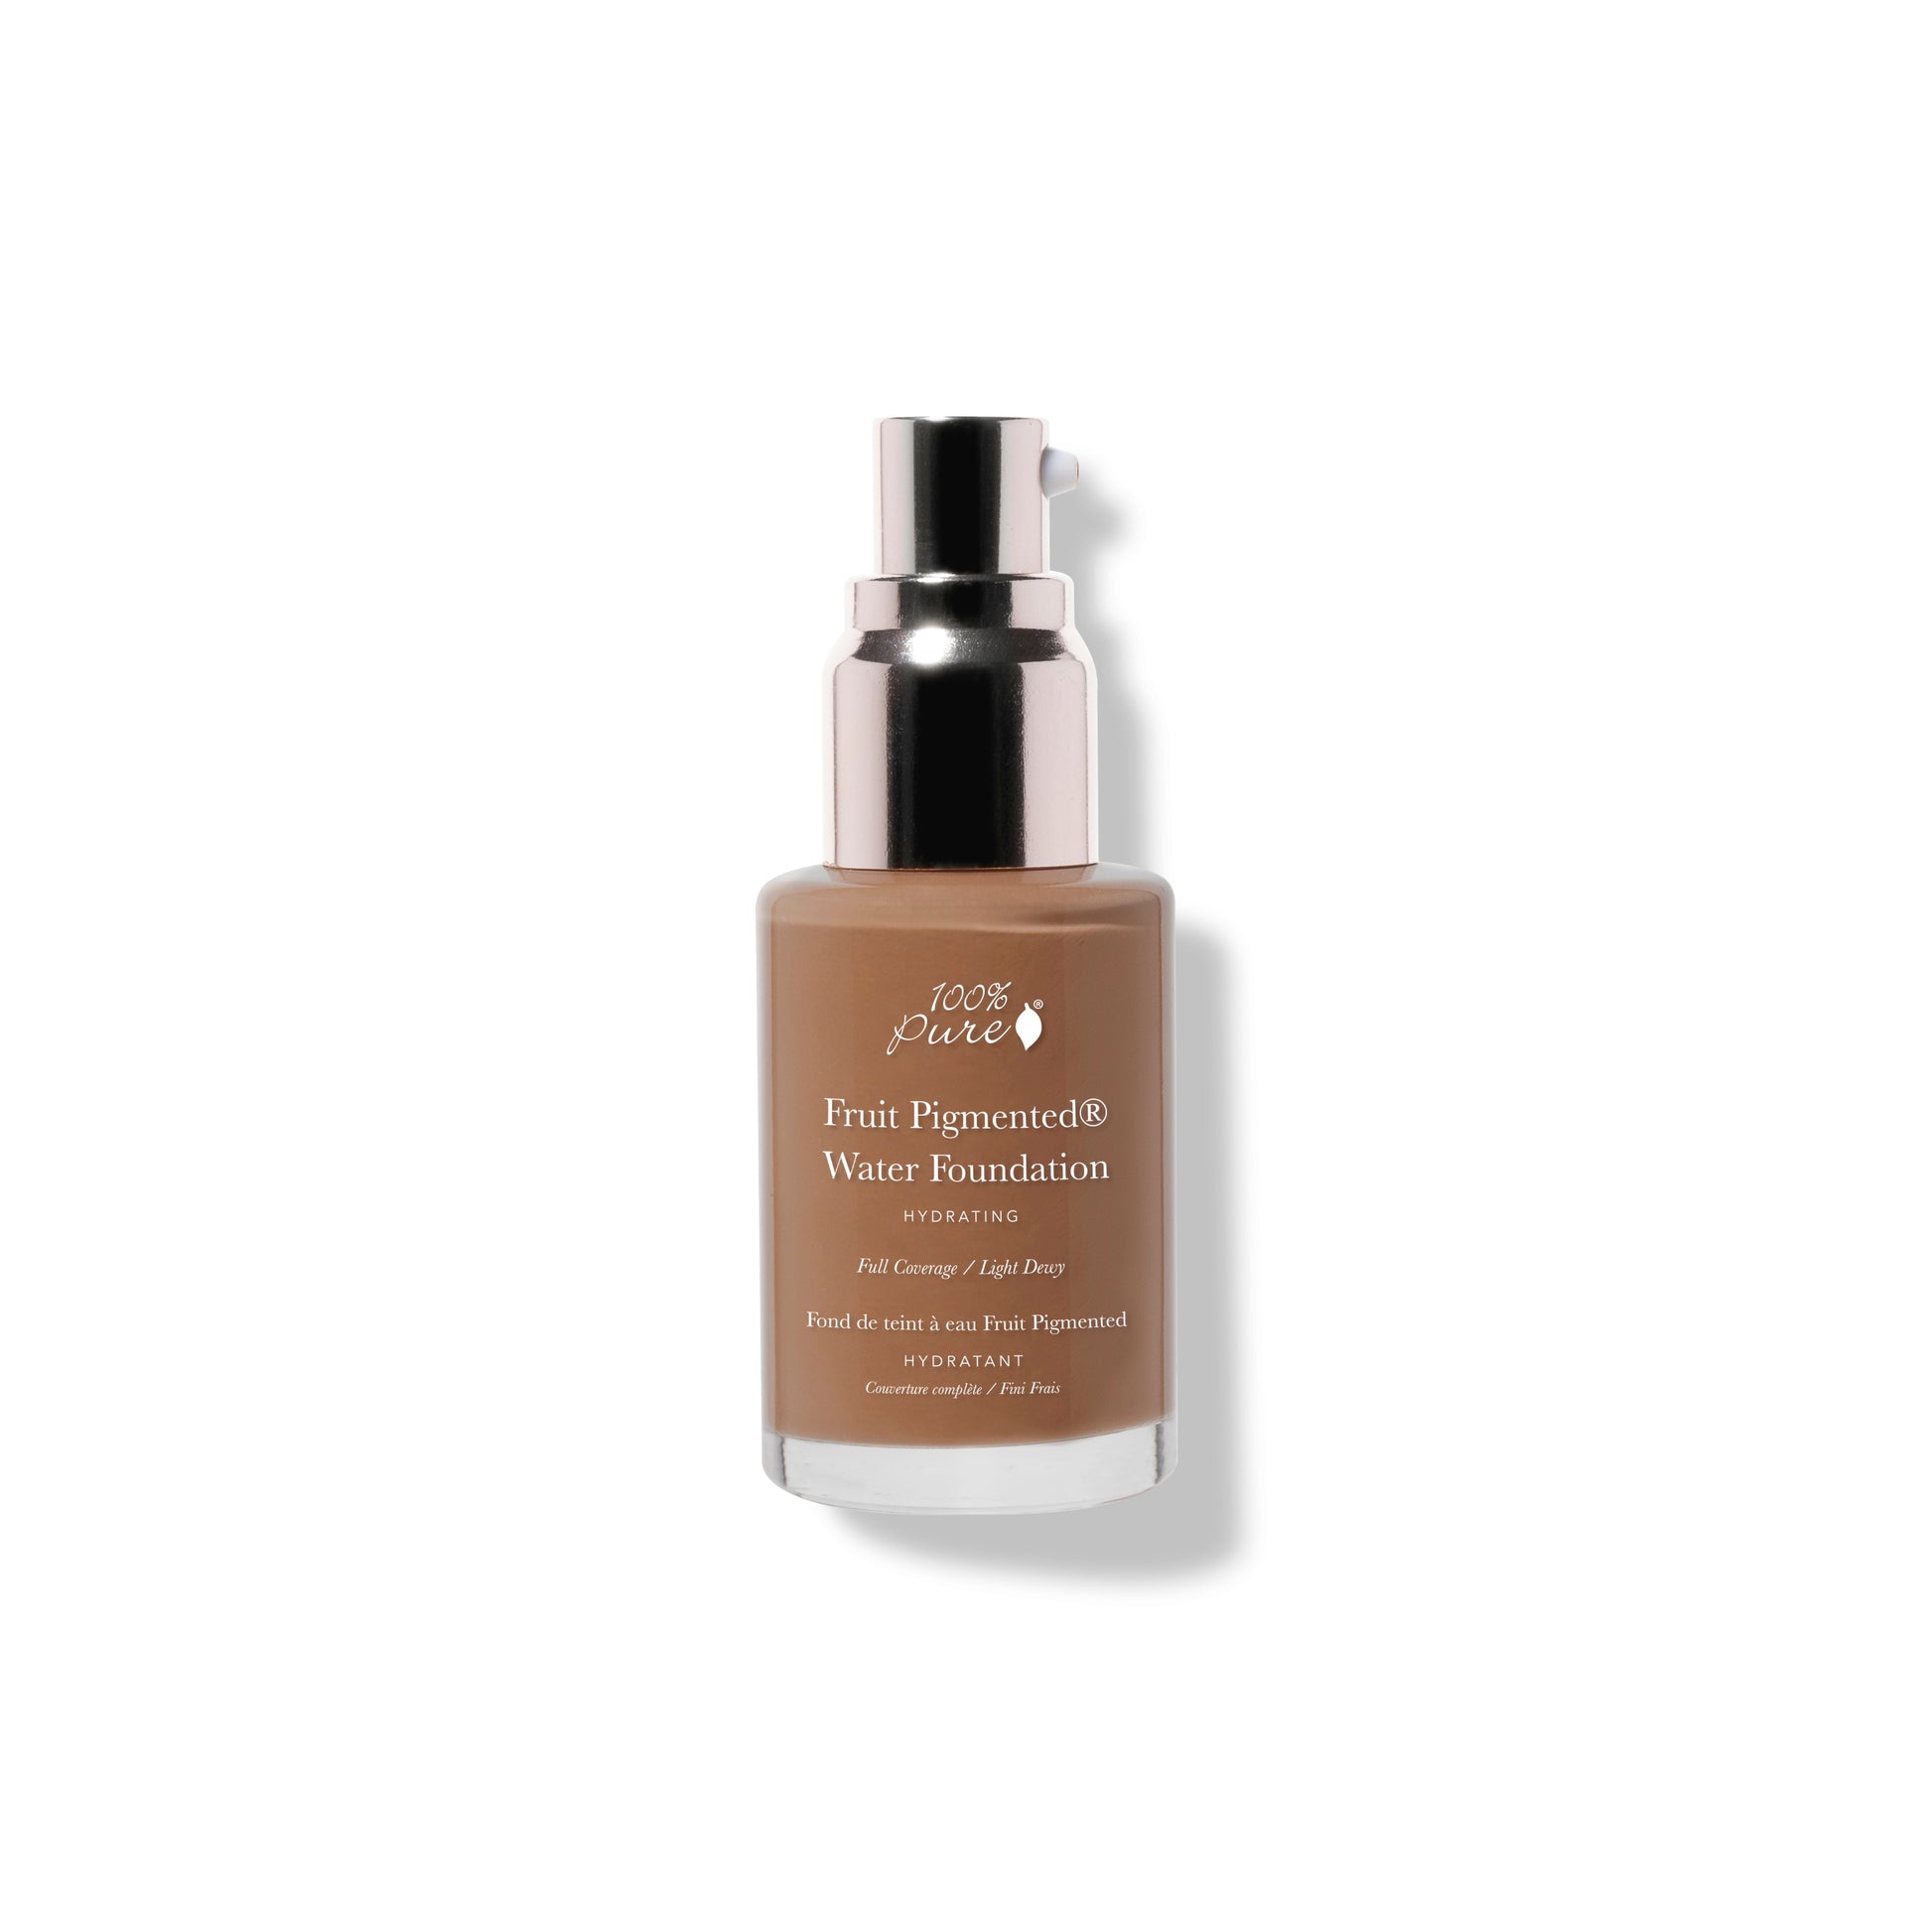 100% PURE Fruit Pigmented Full Coverage Water Foundation warm 7.0